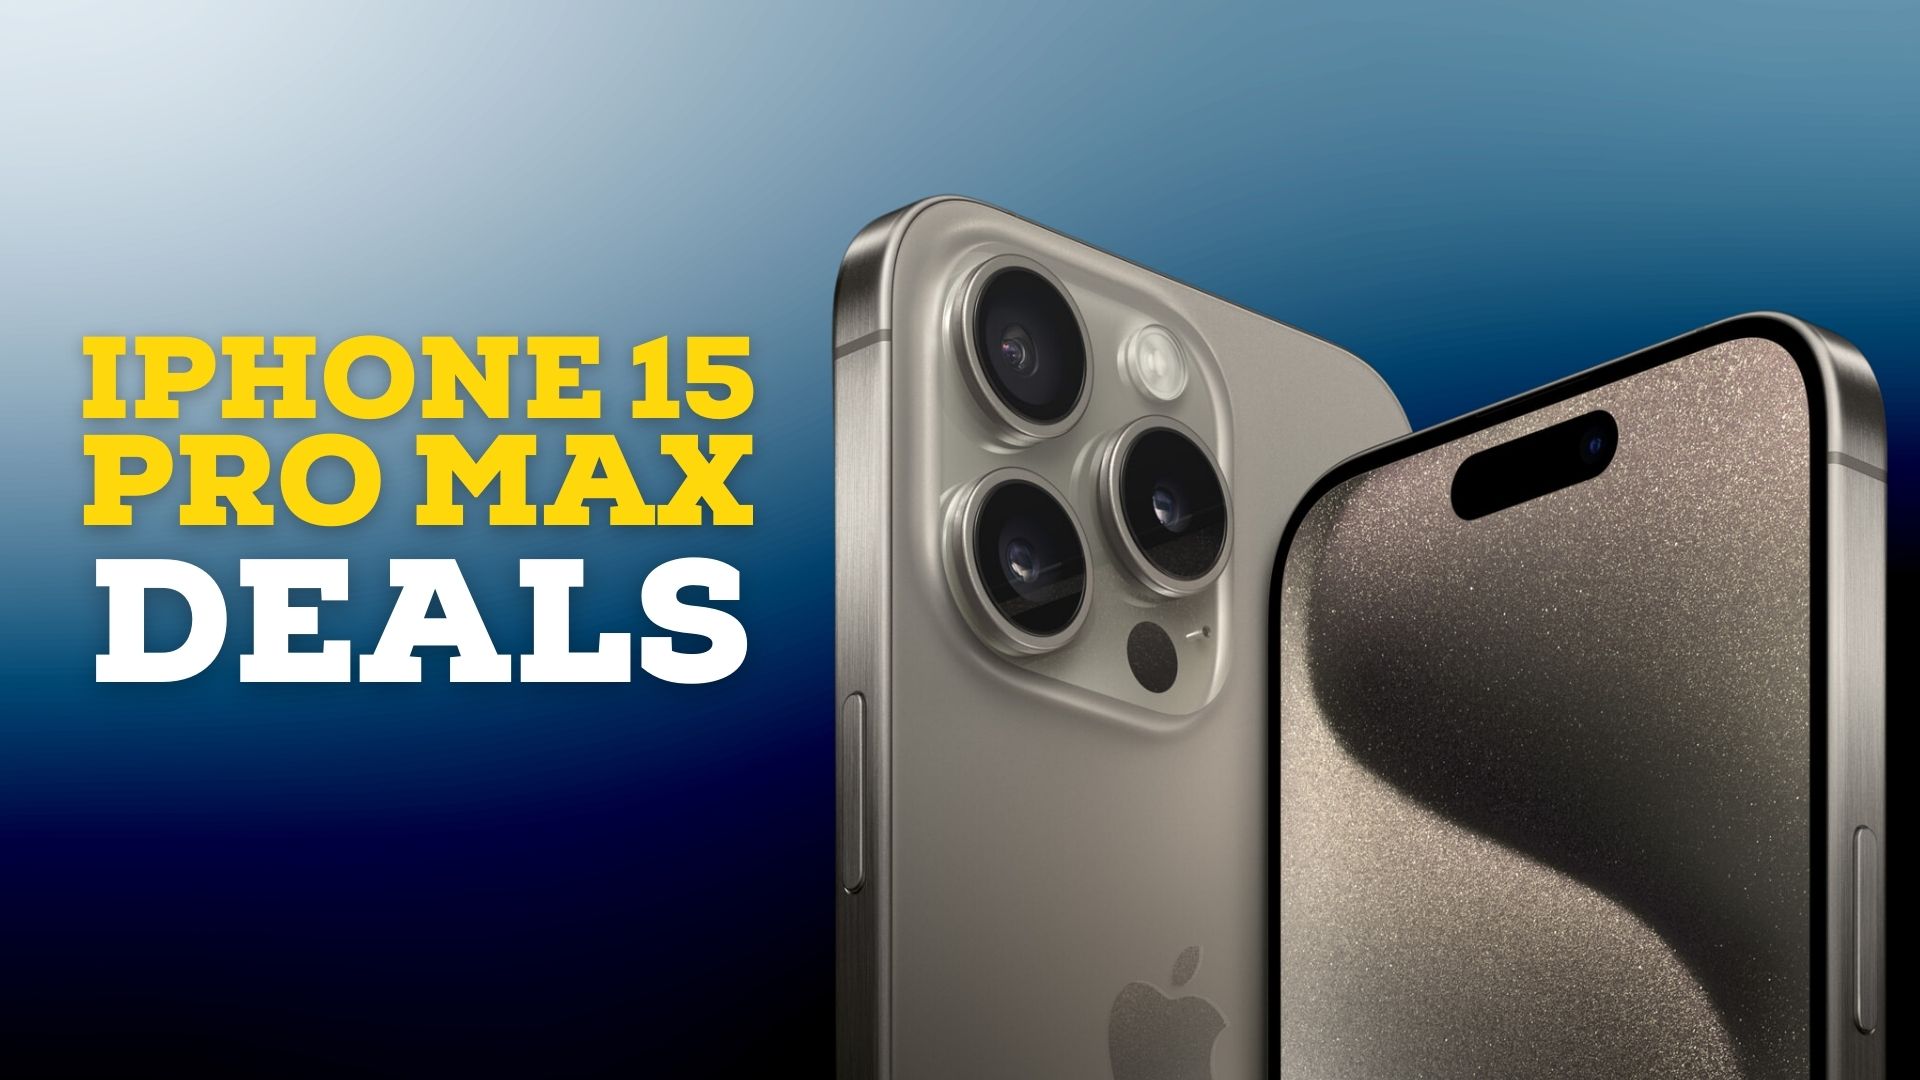 iPhone 15 Pro and Pro Max first impressions: Small but steady upgrades